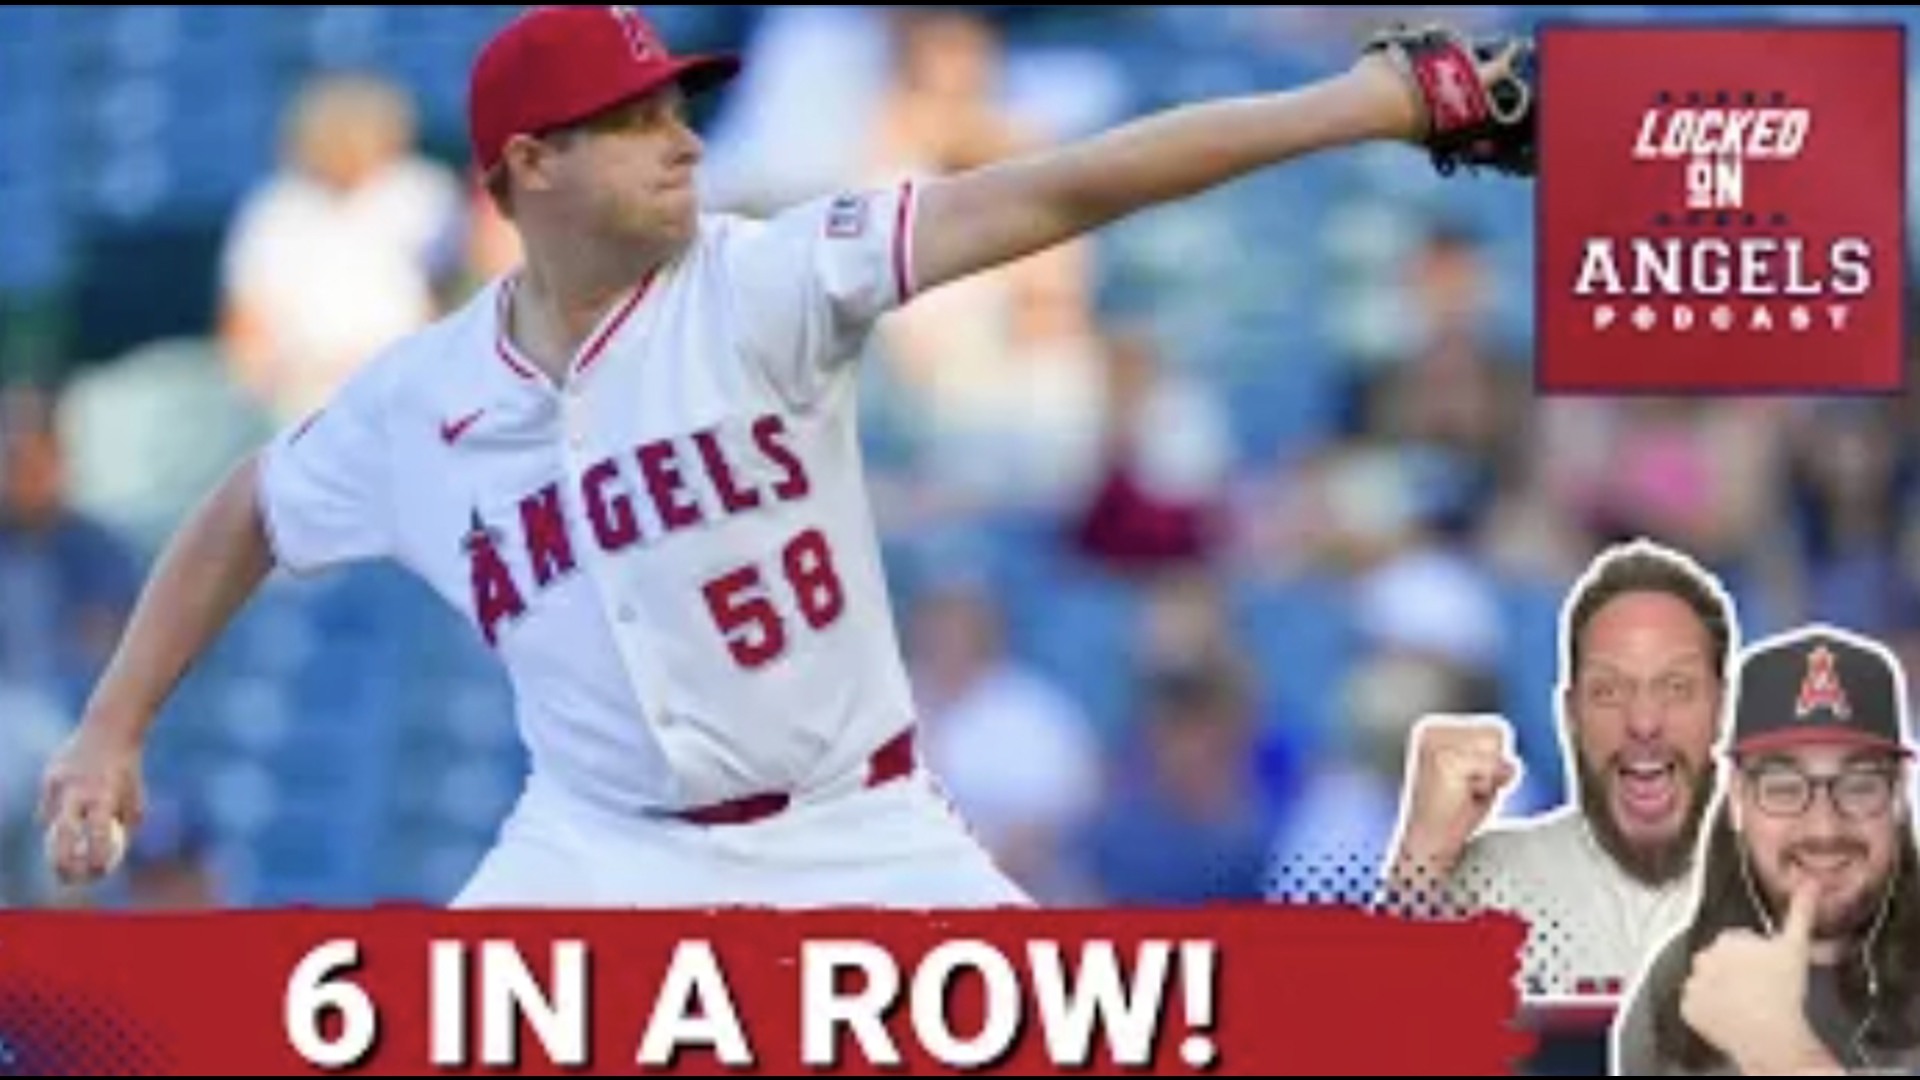 The Los Angeles Angels took 3 of 4 from the Detroit Tigers over the weekend, with a win on Saturday giving them 6 wins in a row!